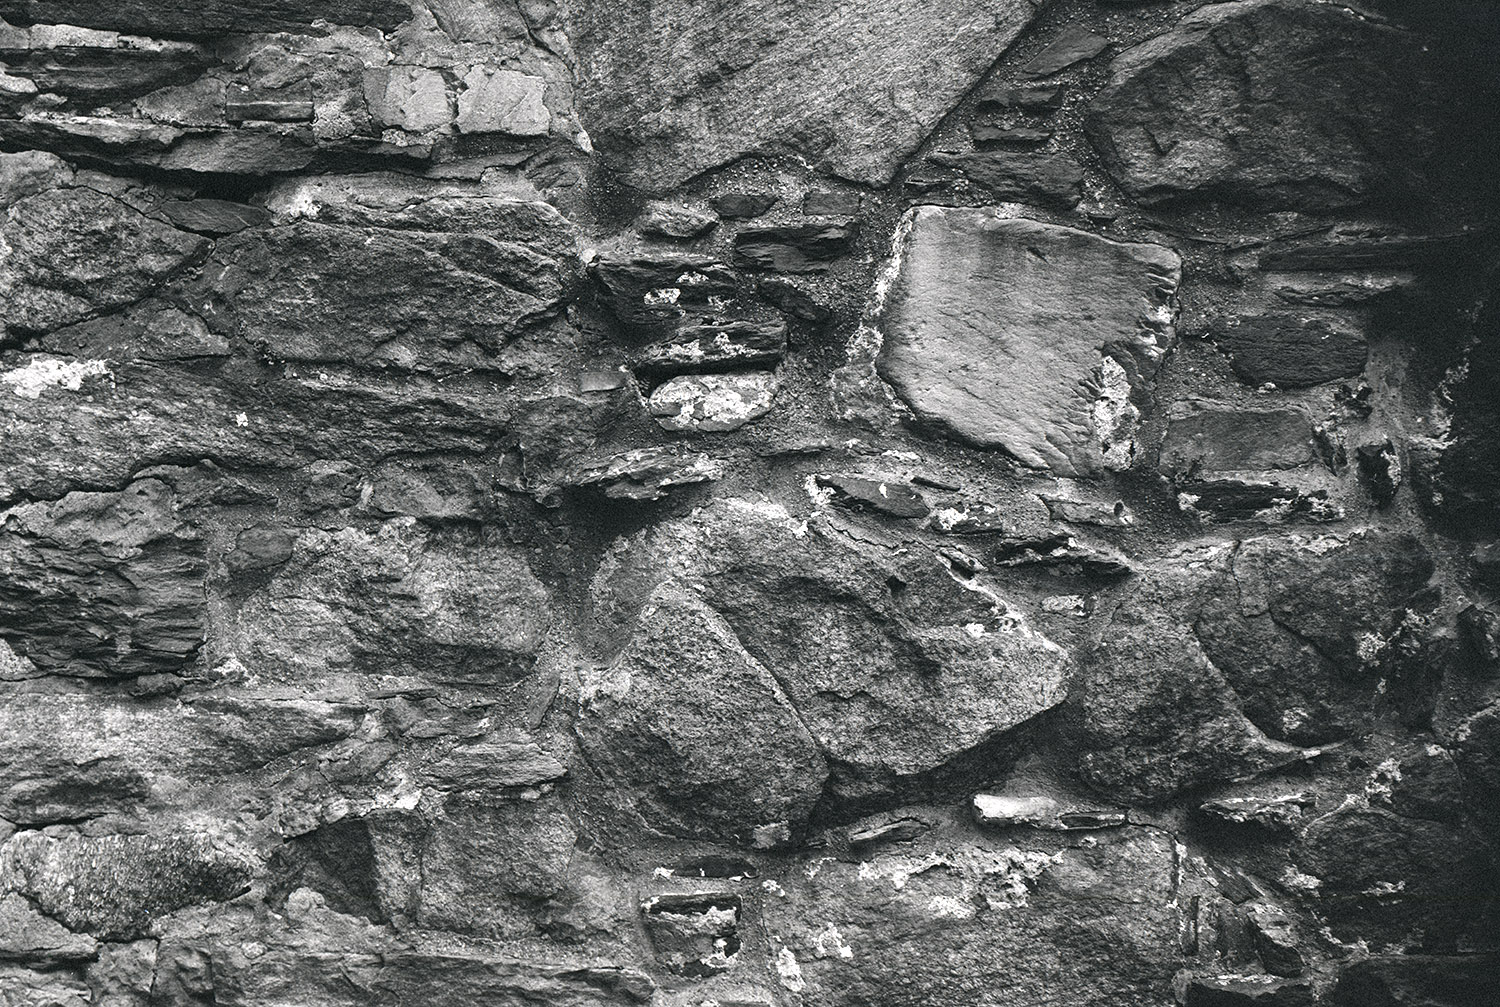   Additional image, no. 3: photo of mediveal stone wall, where Håkonshallen stands today, Bergen.   Analogue 4x5, b/w photograph.  